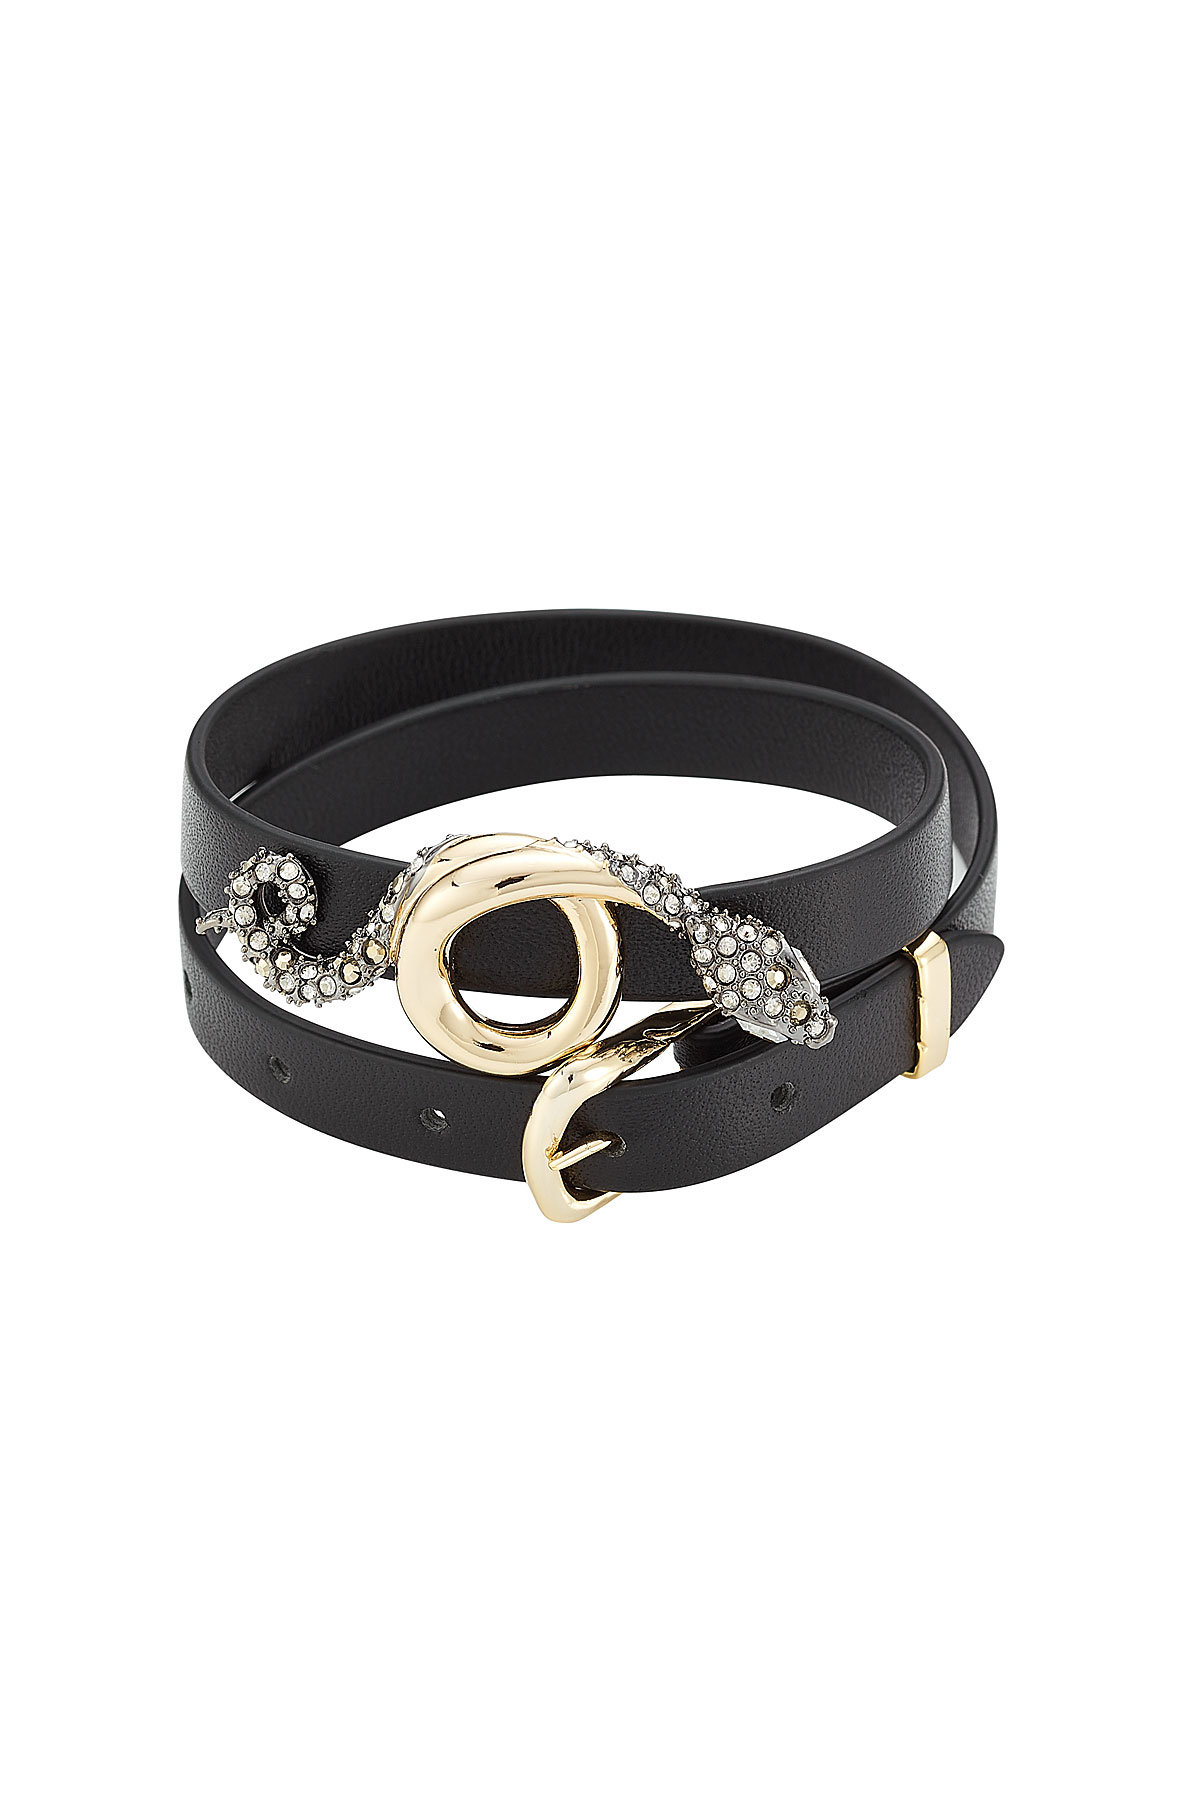 Alexis Bittar - Leather Bracelet with 10kt Gold and Crystals